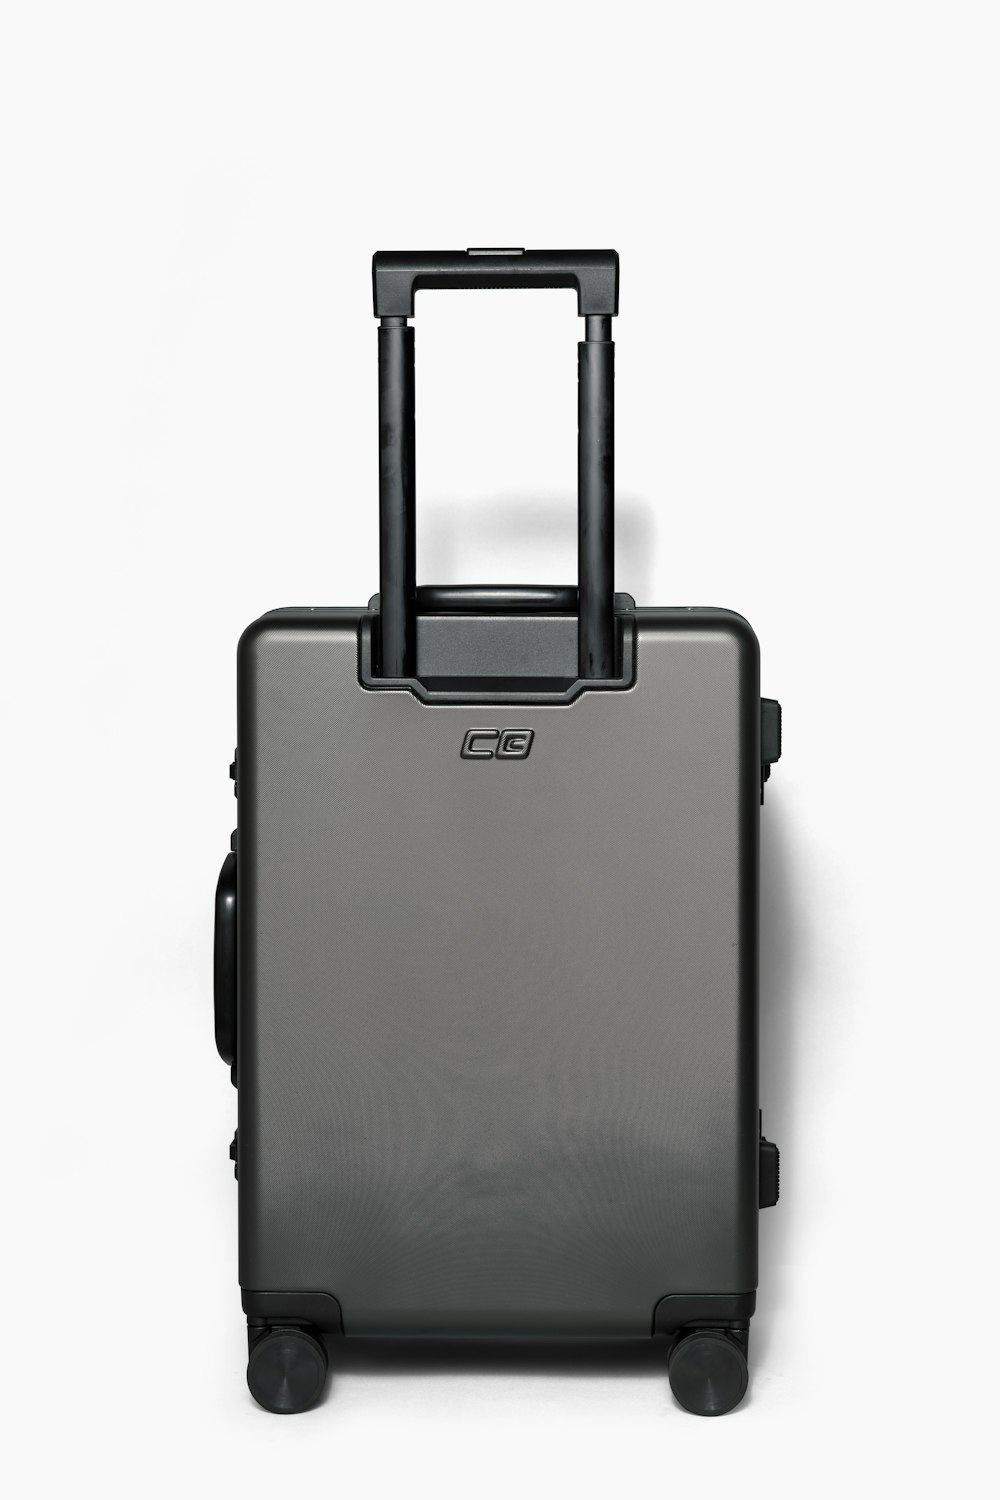 a black suitcase with wheels on a white background